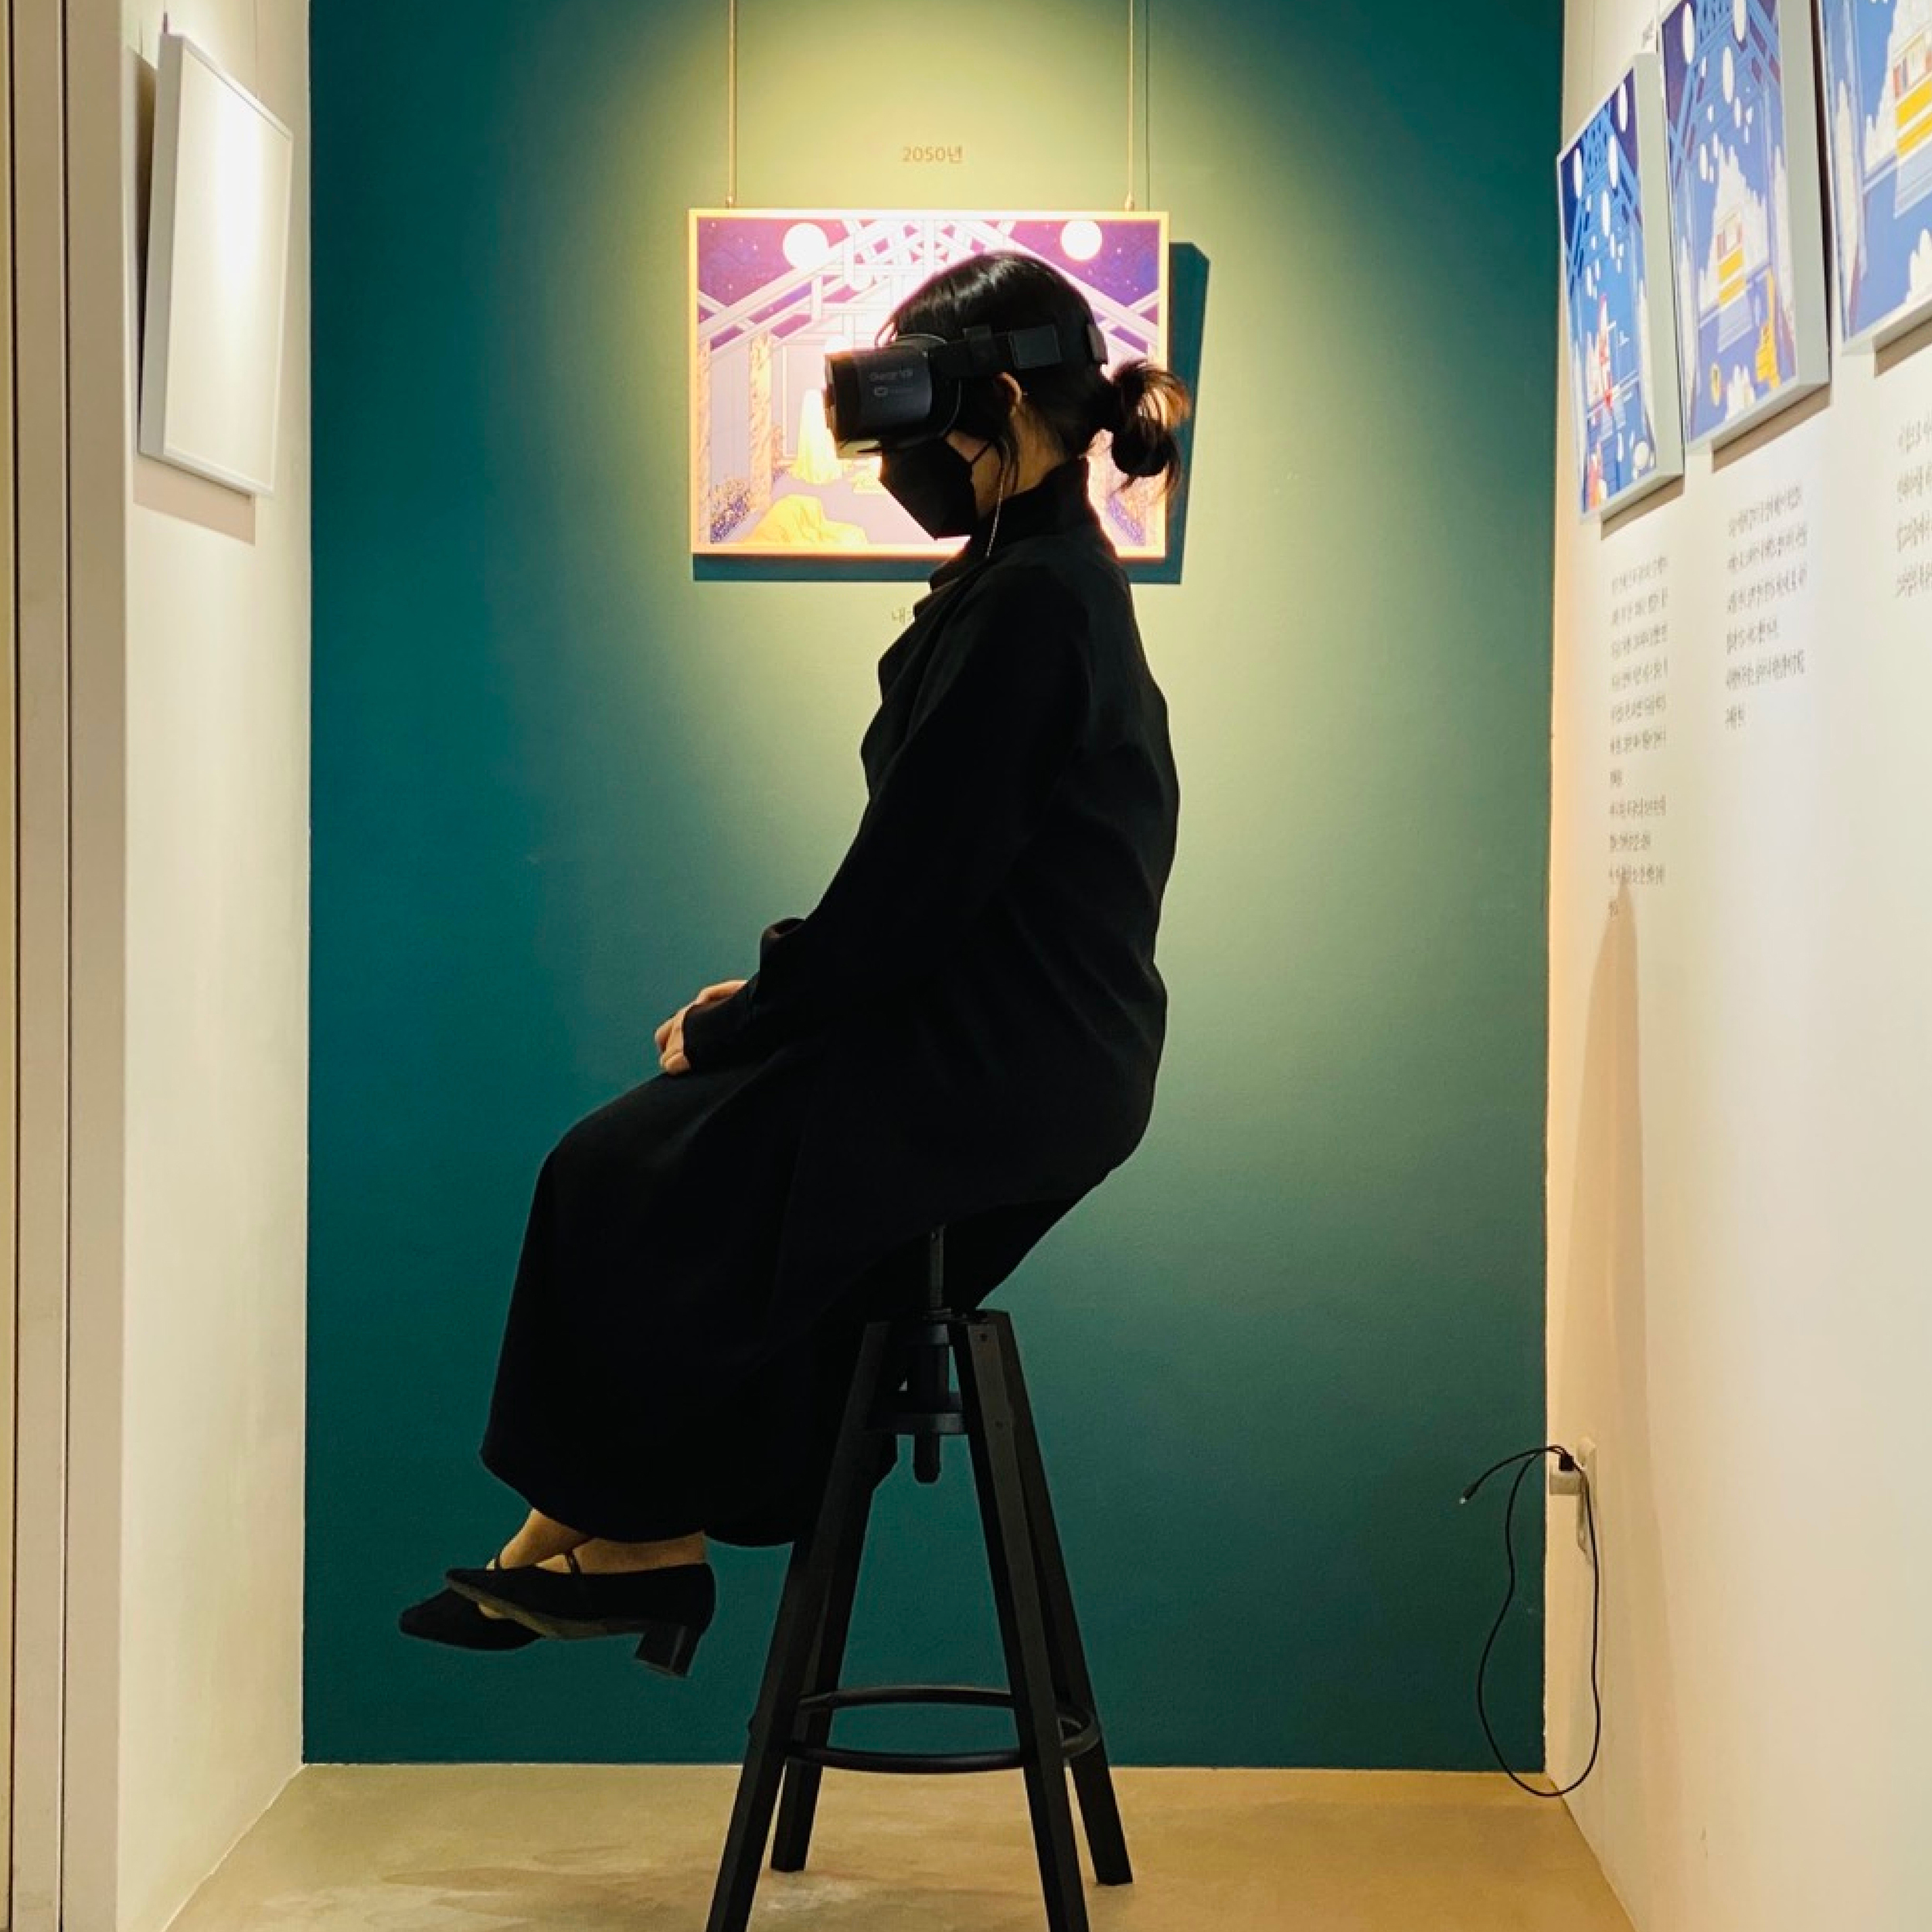 Through four distinct exhibits that use virtual reality (VR), interactive videos, and sculptures, youth can immerse themselves in the current and future impacts of AI technology.